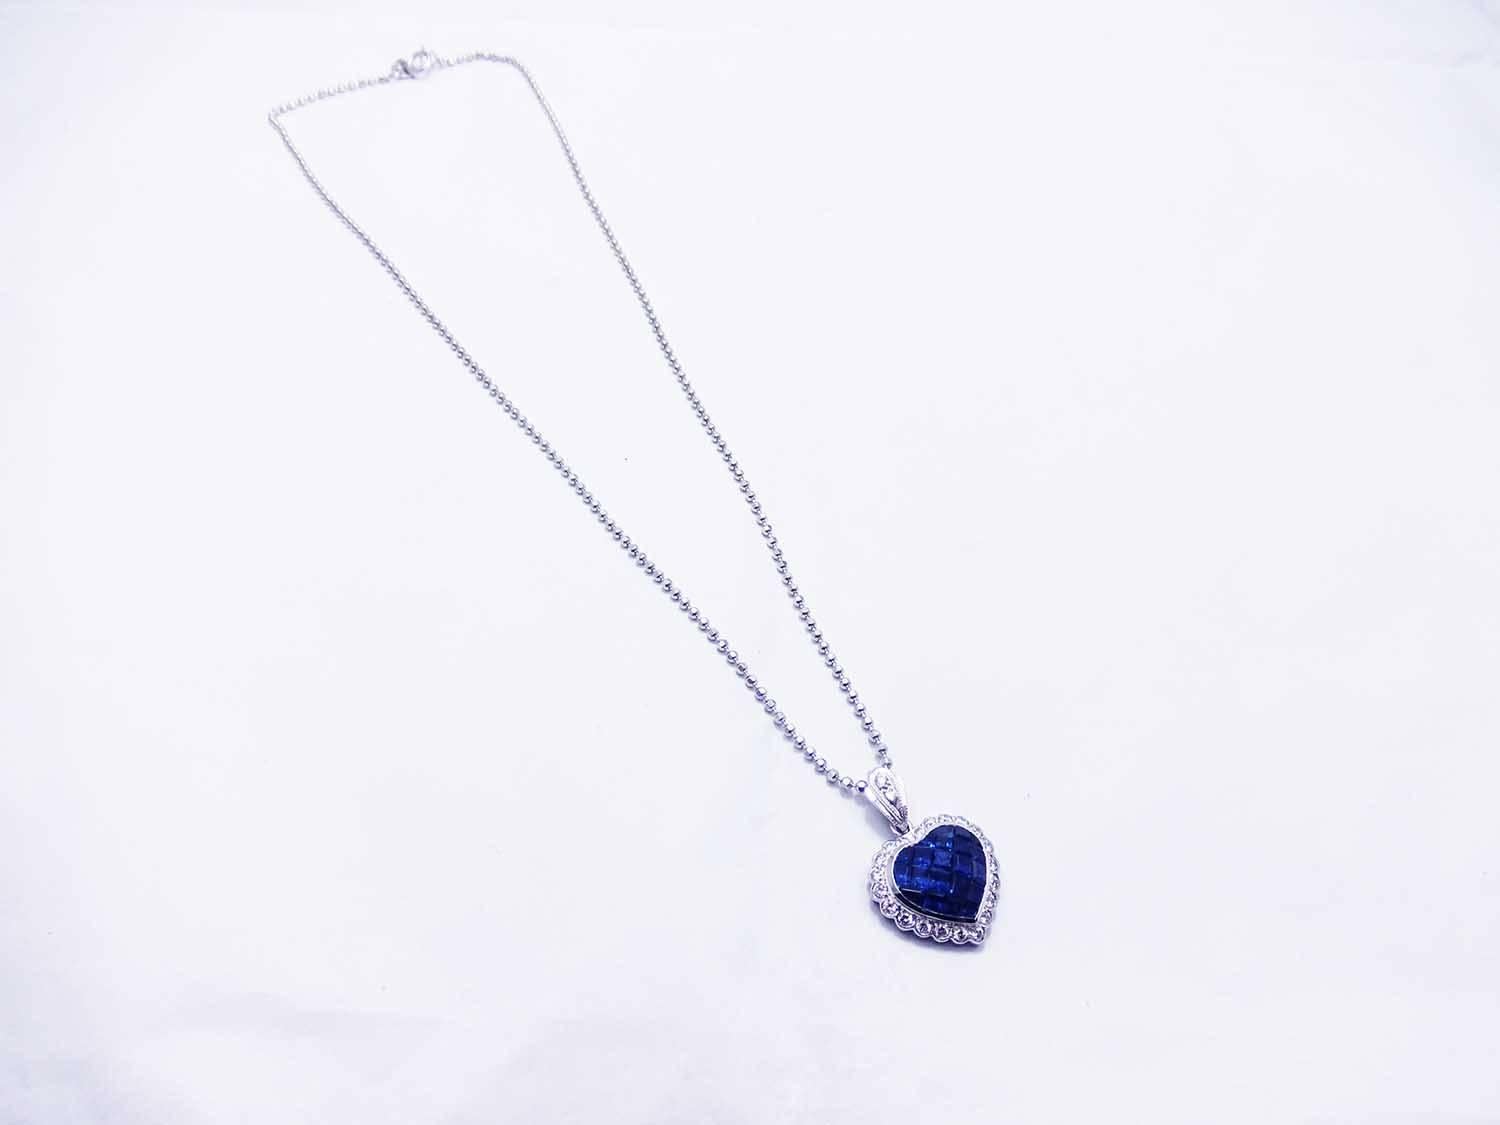 Blue sapphire heart pendant made in 18k white gold .
Top quality sapphire 3.35 ct
Diamond 0.40 ct H VS quality